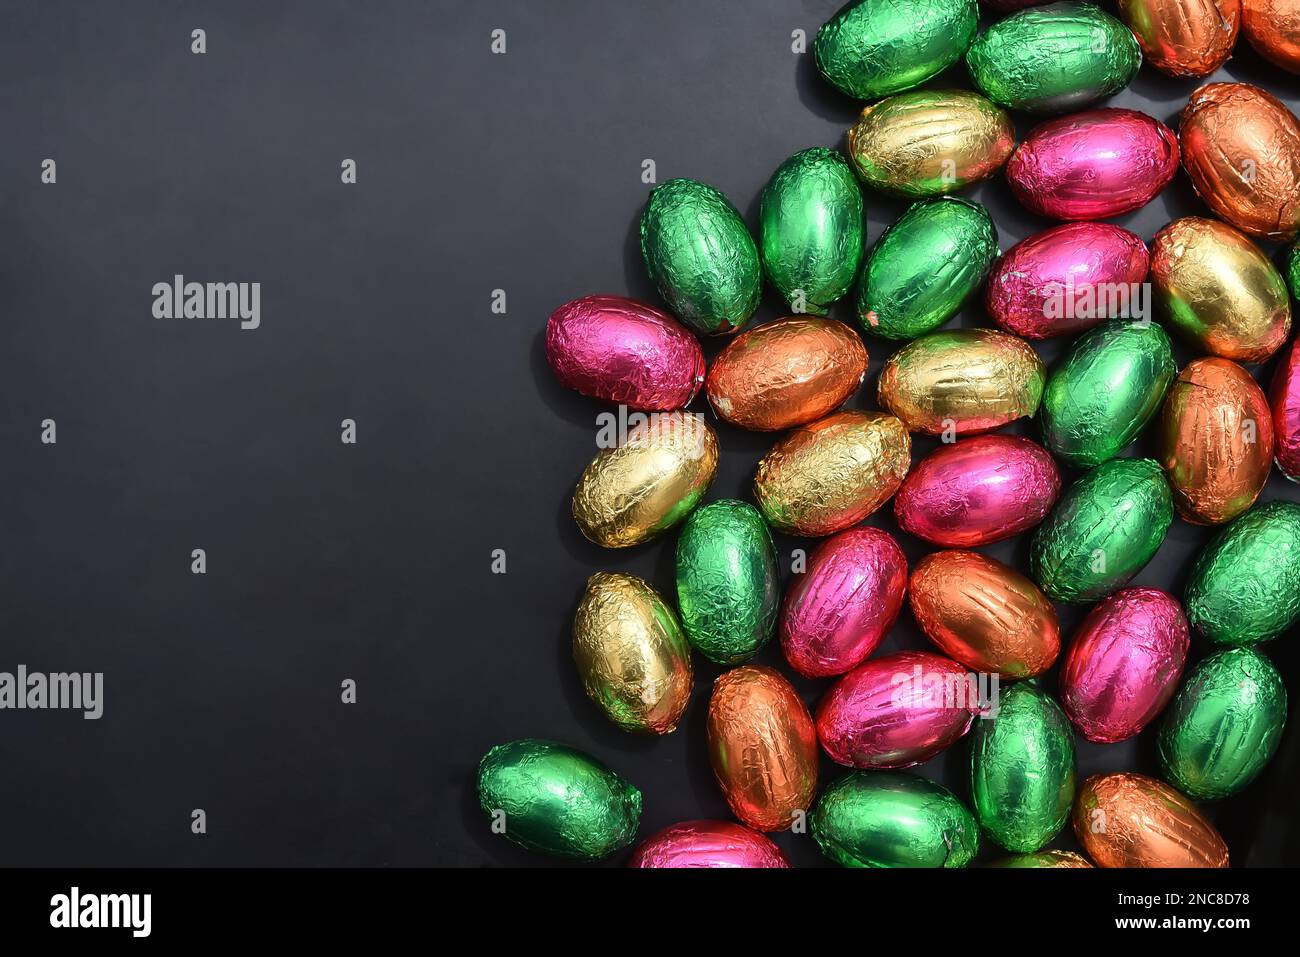 Foil wrapped multi coloured easter eggs in pink, green, orange and yelow in a pile or group, against a grey black background. Stock Photo